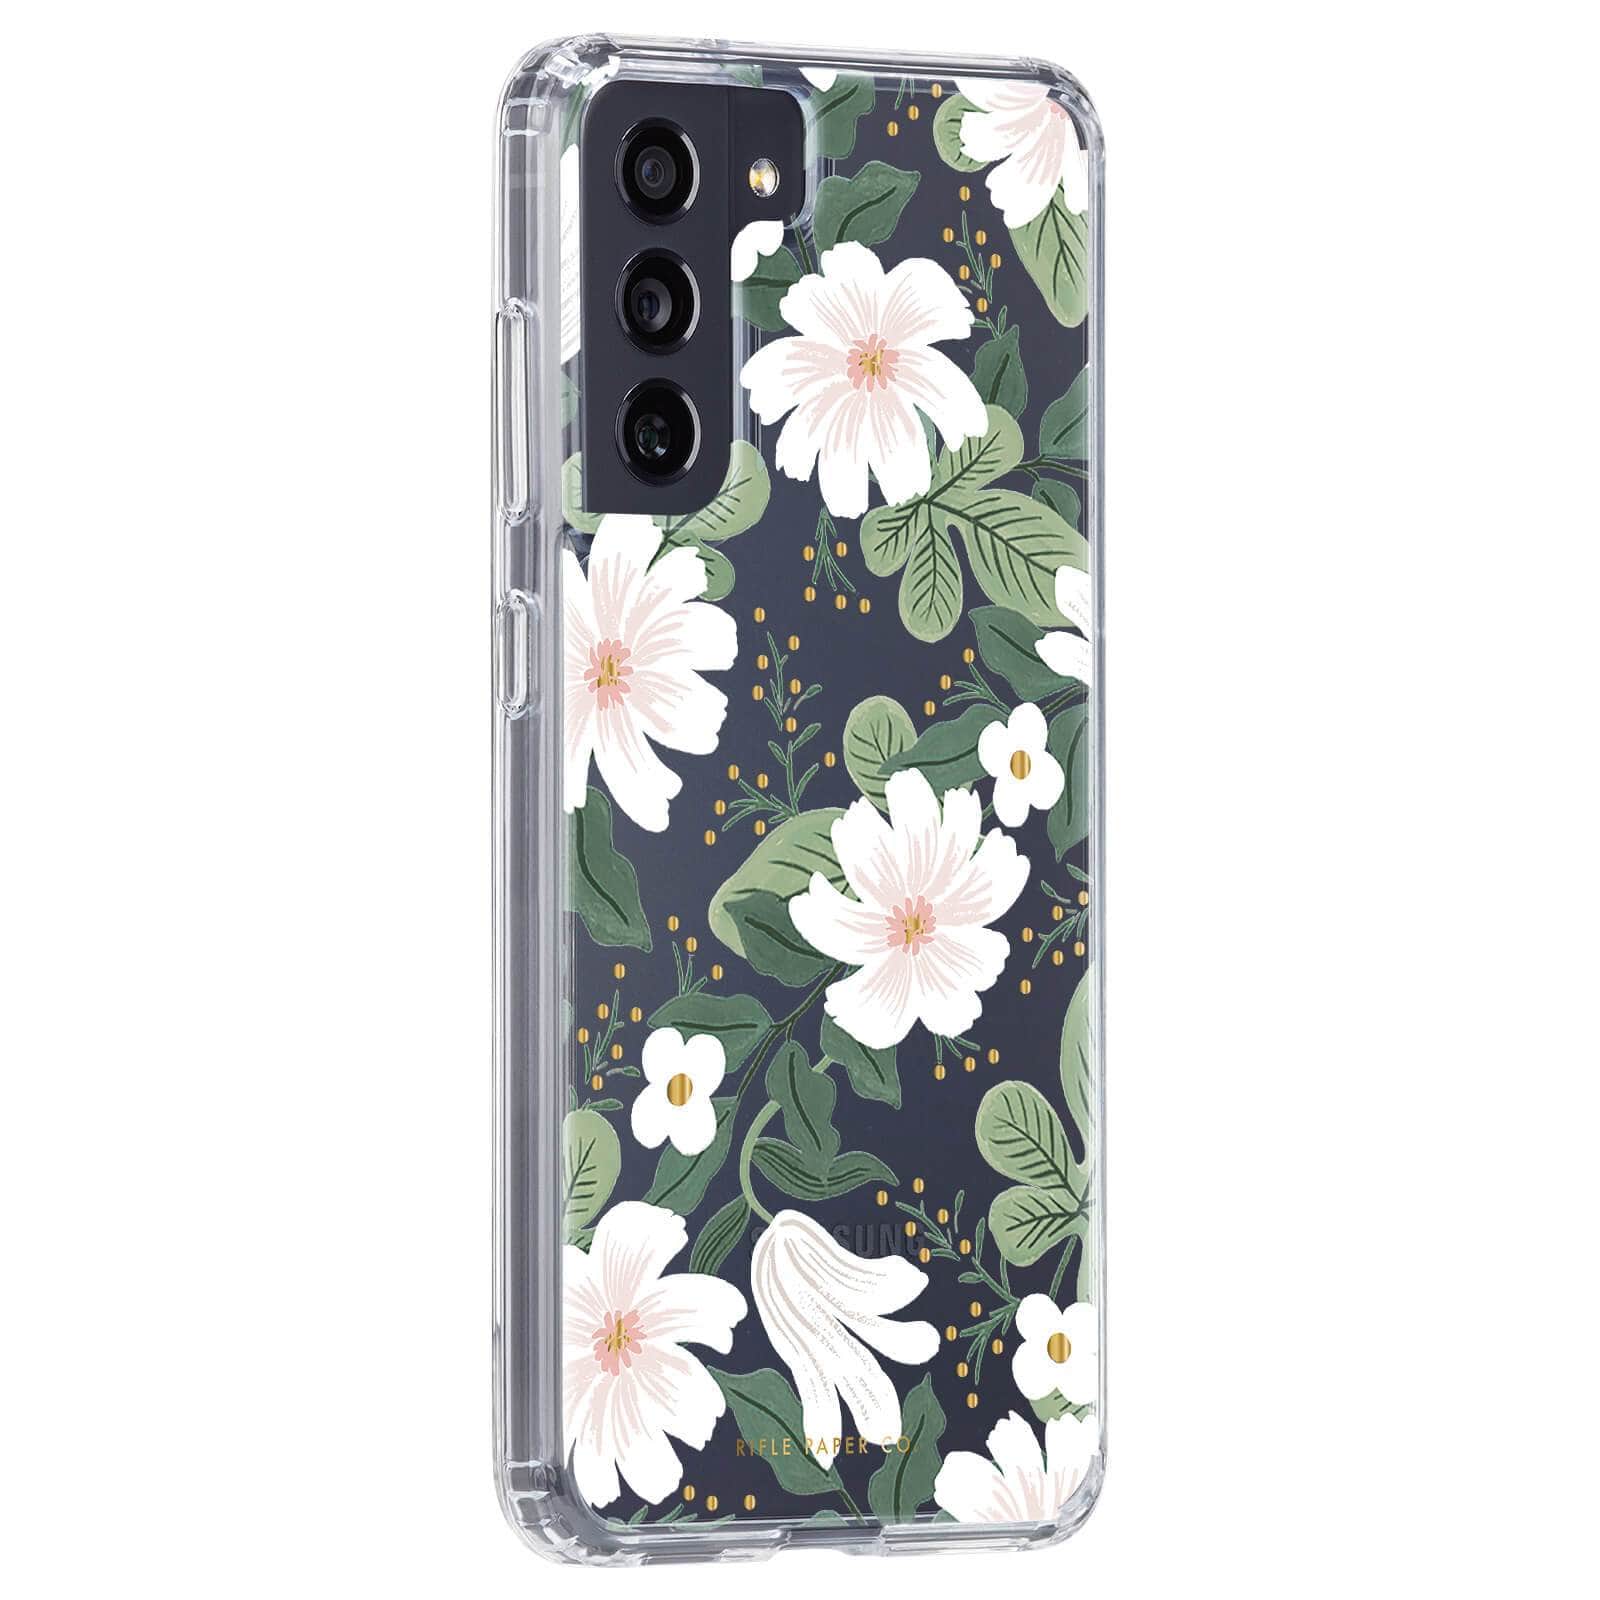 Partially clear case with Rifle Paper Co. floral print on it. color::Willow